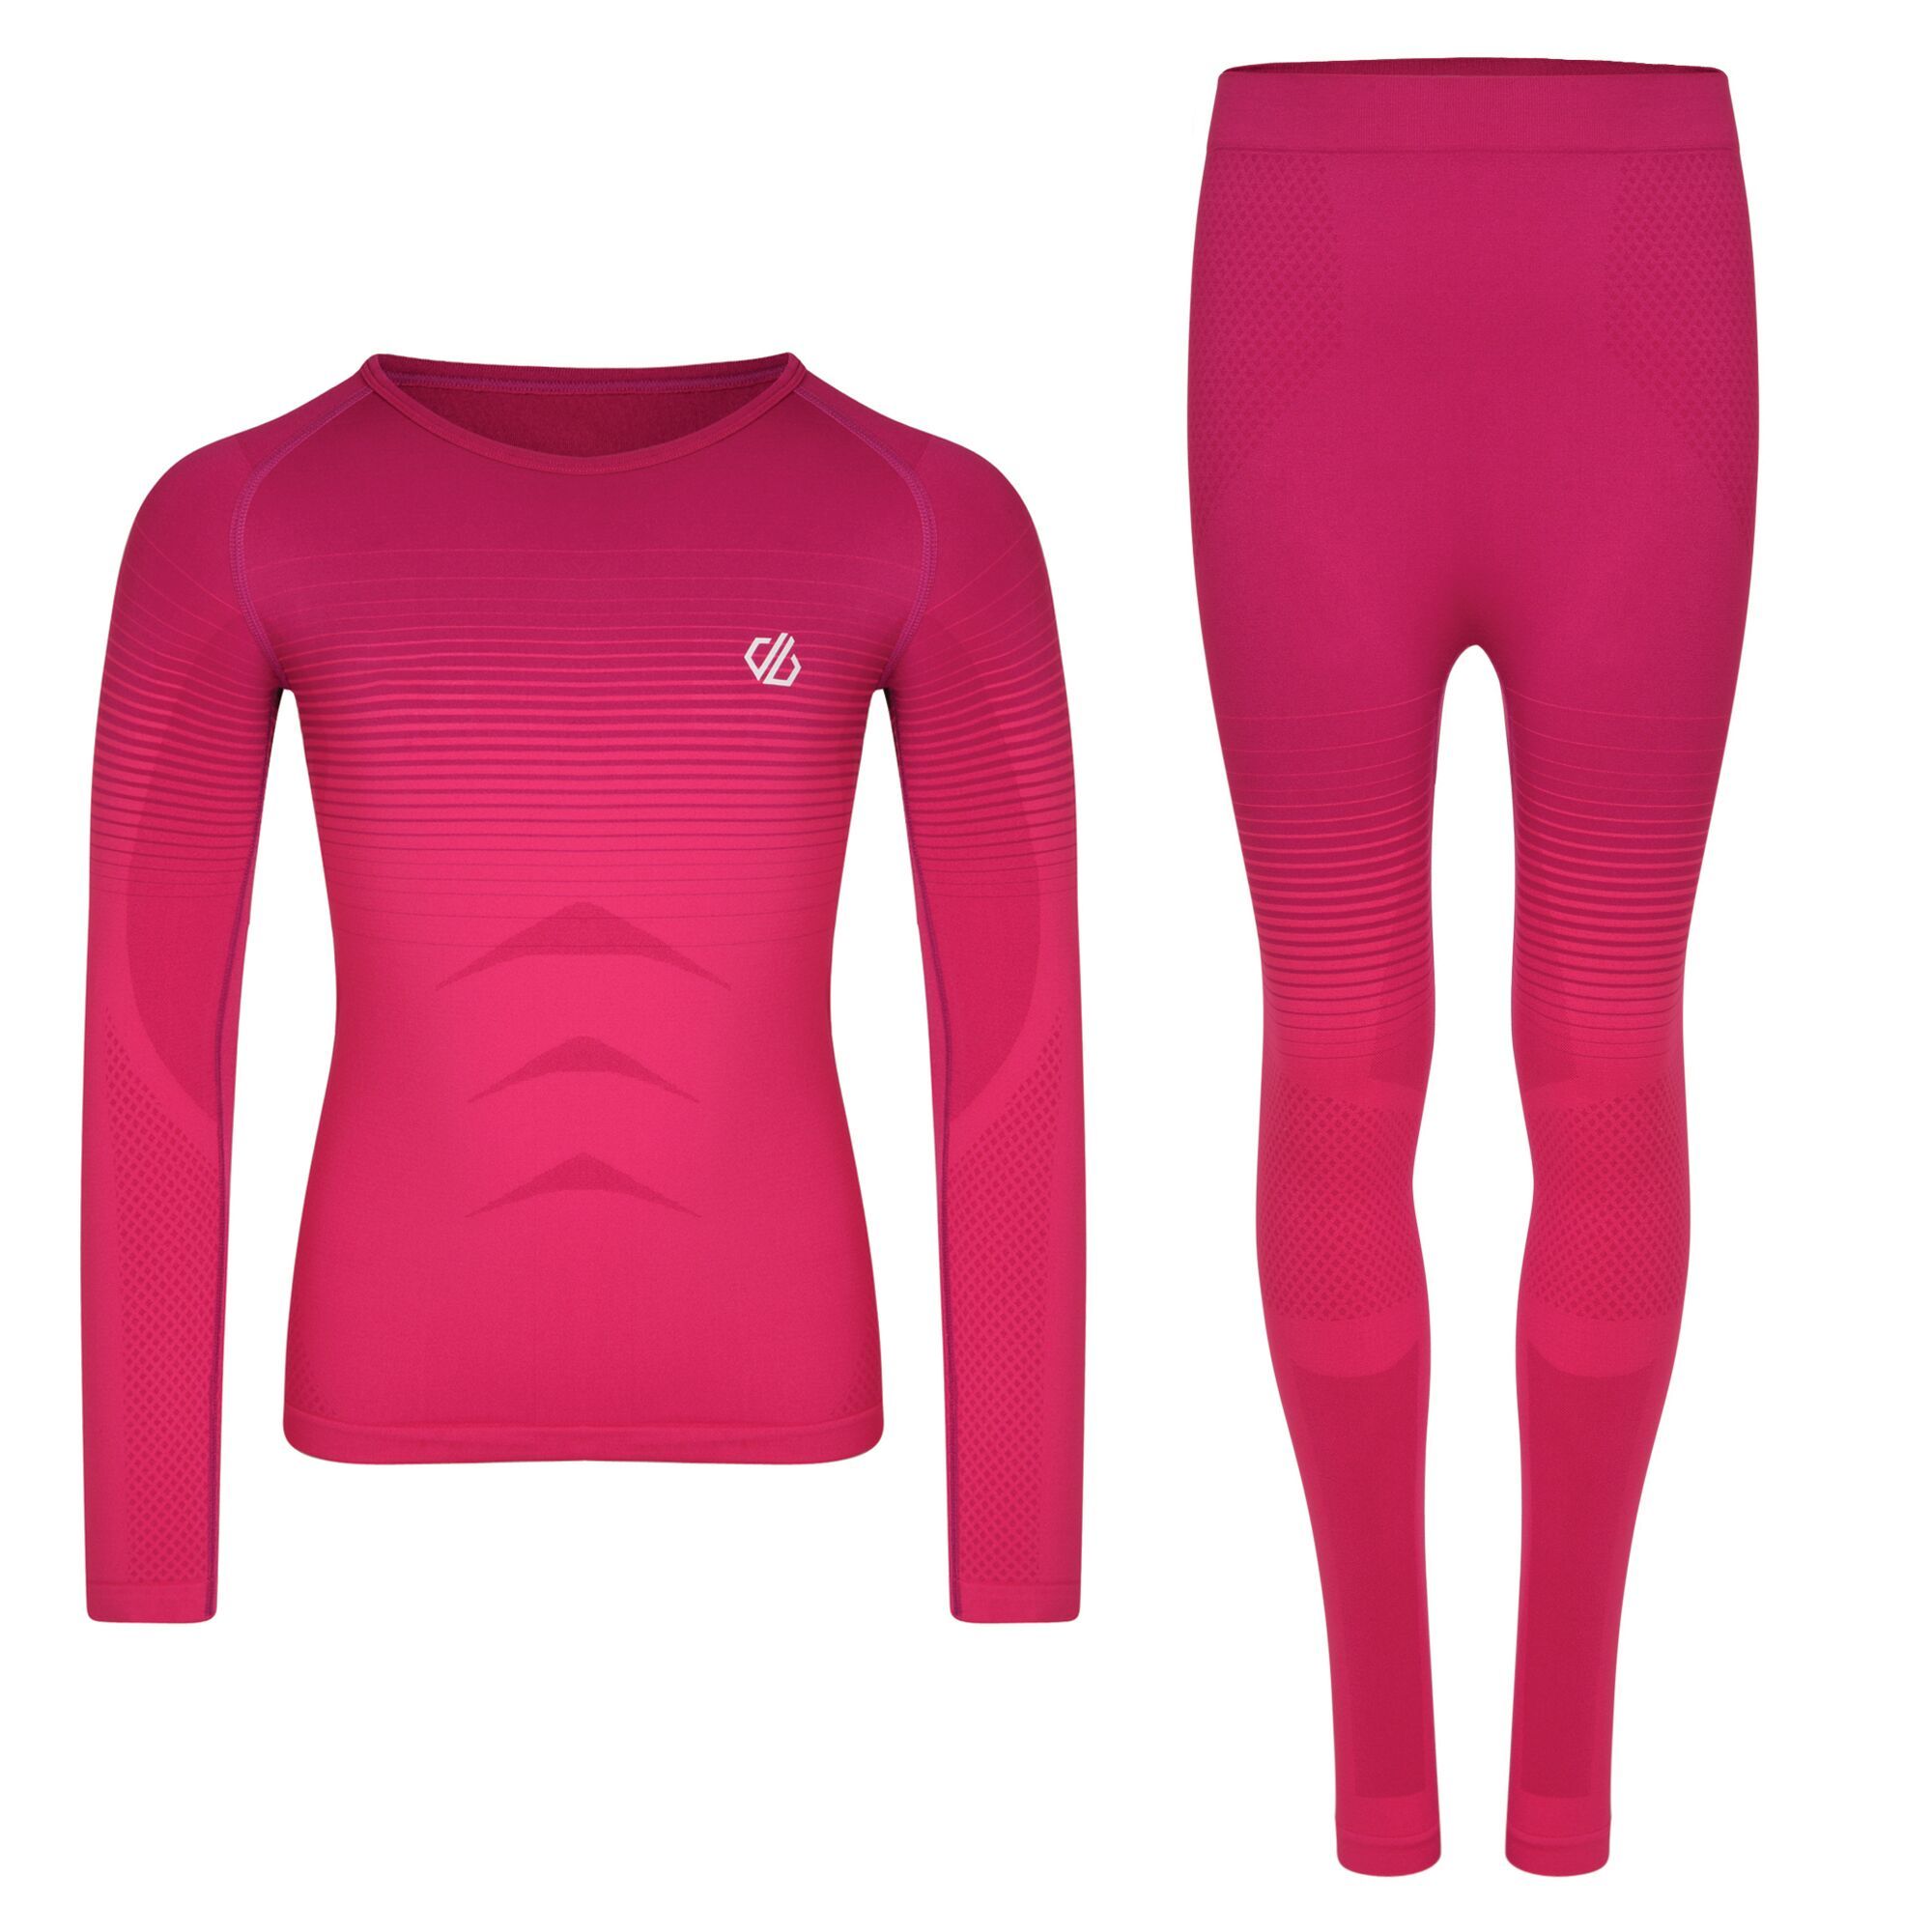 Elastane (8%), Polyester (42%), Polyamide (50%). Performance base layer collection. SeamSmart Technology. Q-Wic Seamless knitted fabric. Ergonomic body map fit. Fast wicking and quick drying properties.  odour control treatment. Dare 2B Kids Unisex Sizing (chest approx): 2 Years (22.5in/57cm), 3-4 Years (23in/58.5cm), 5-6 Years (23.5in/60cm), 7-8 Years (25in/64cm), 9-10 Years (27in/69cm), 11-12 Years (28in/71cm), 32